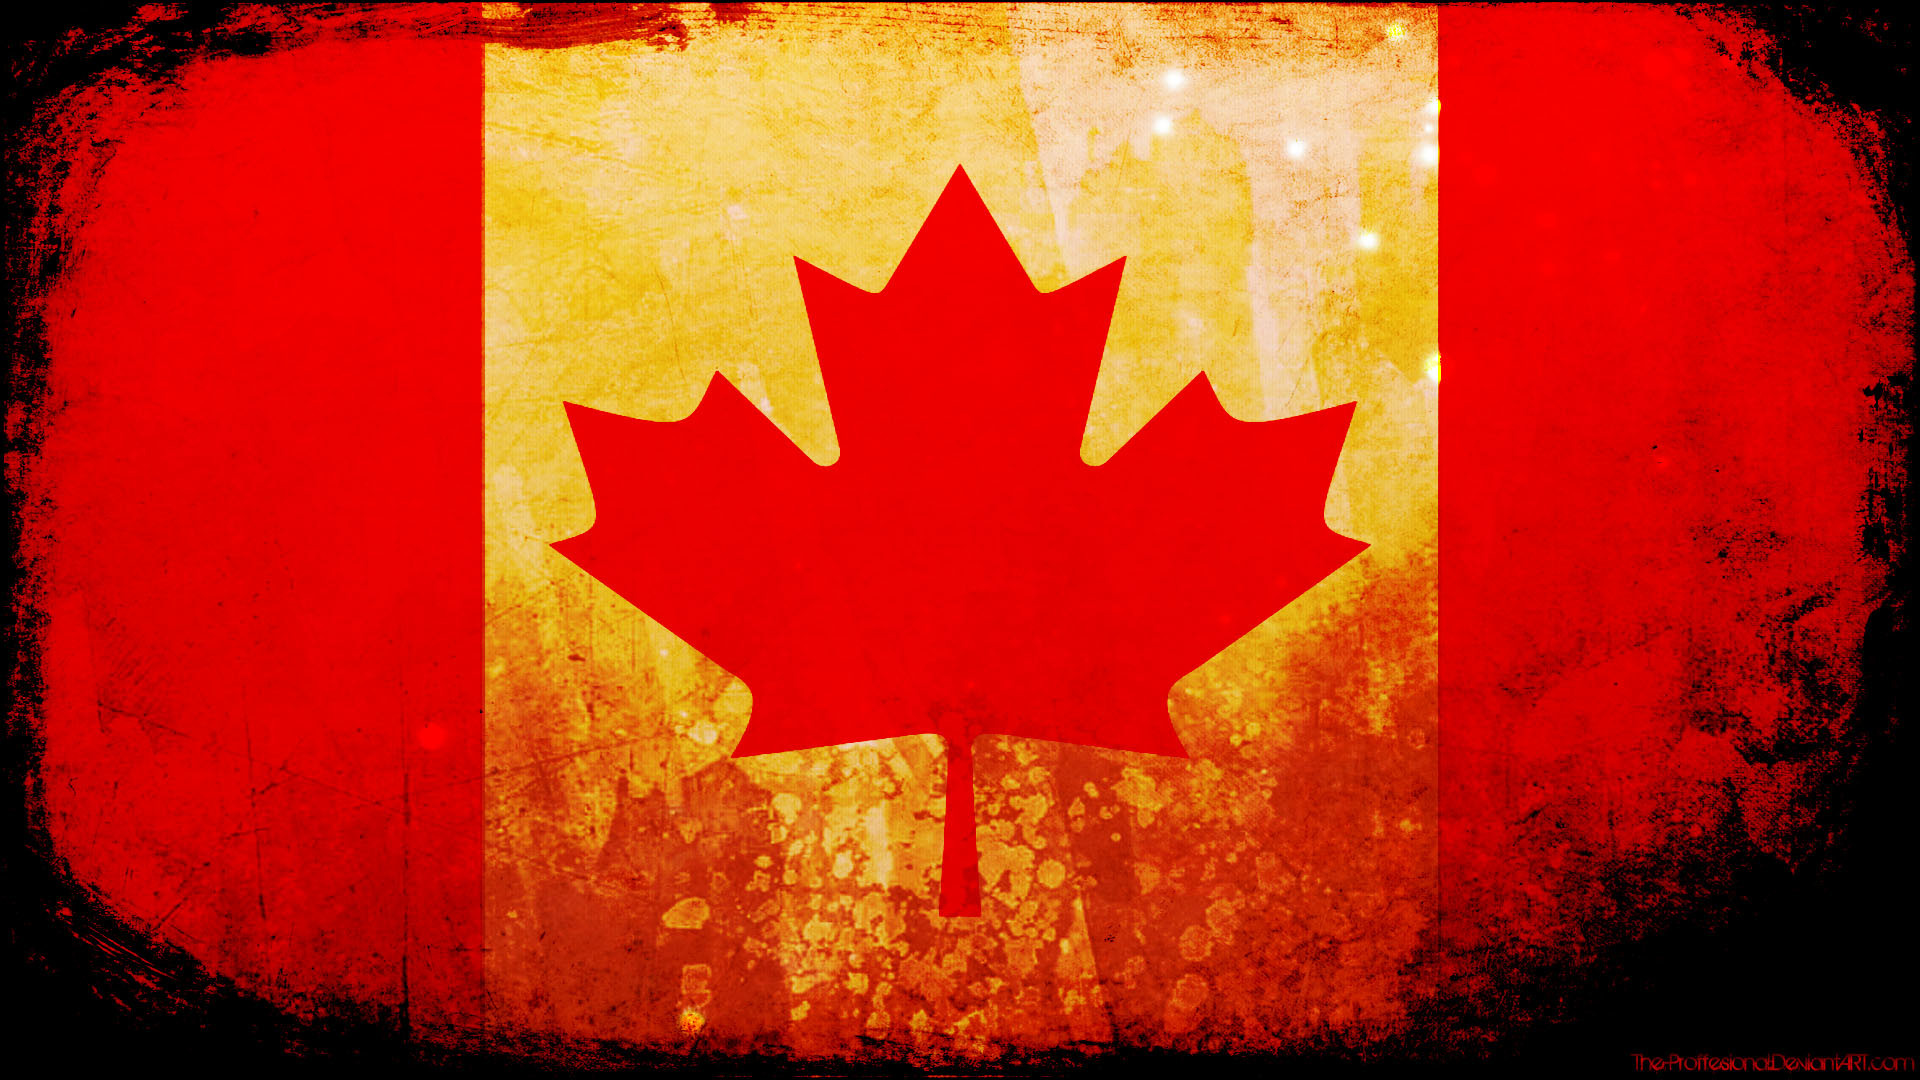 1920x1080 ... Canada flag grunge wallpaper by The-proffesional